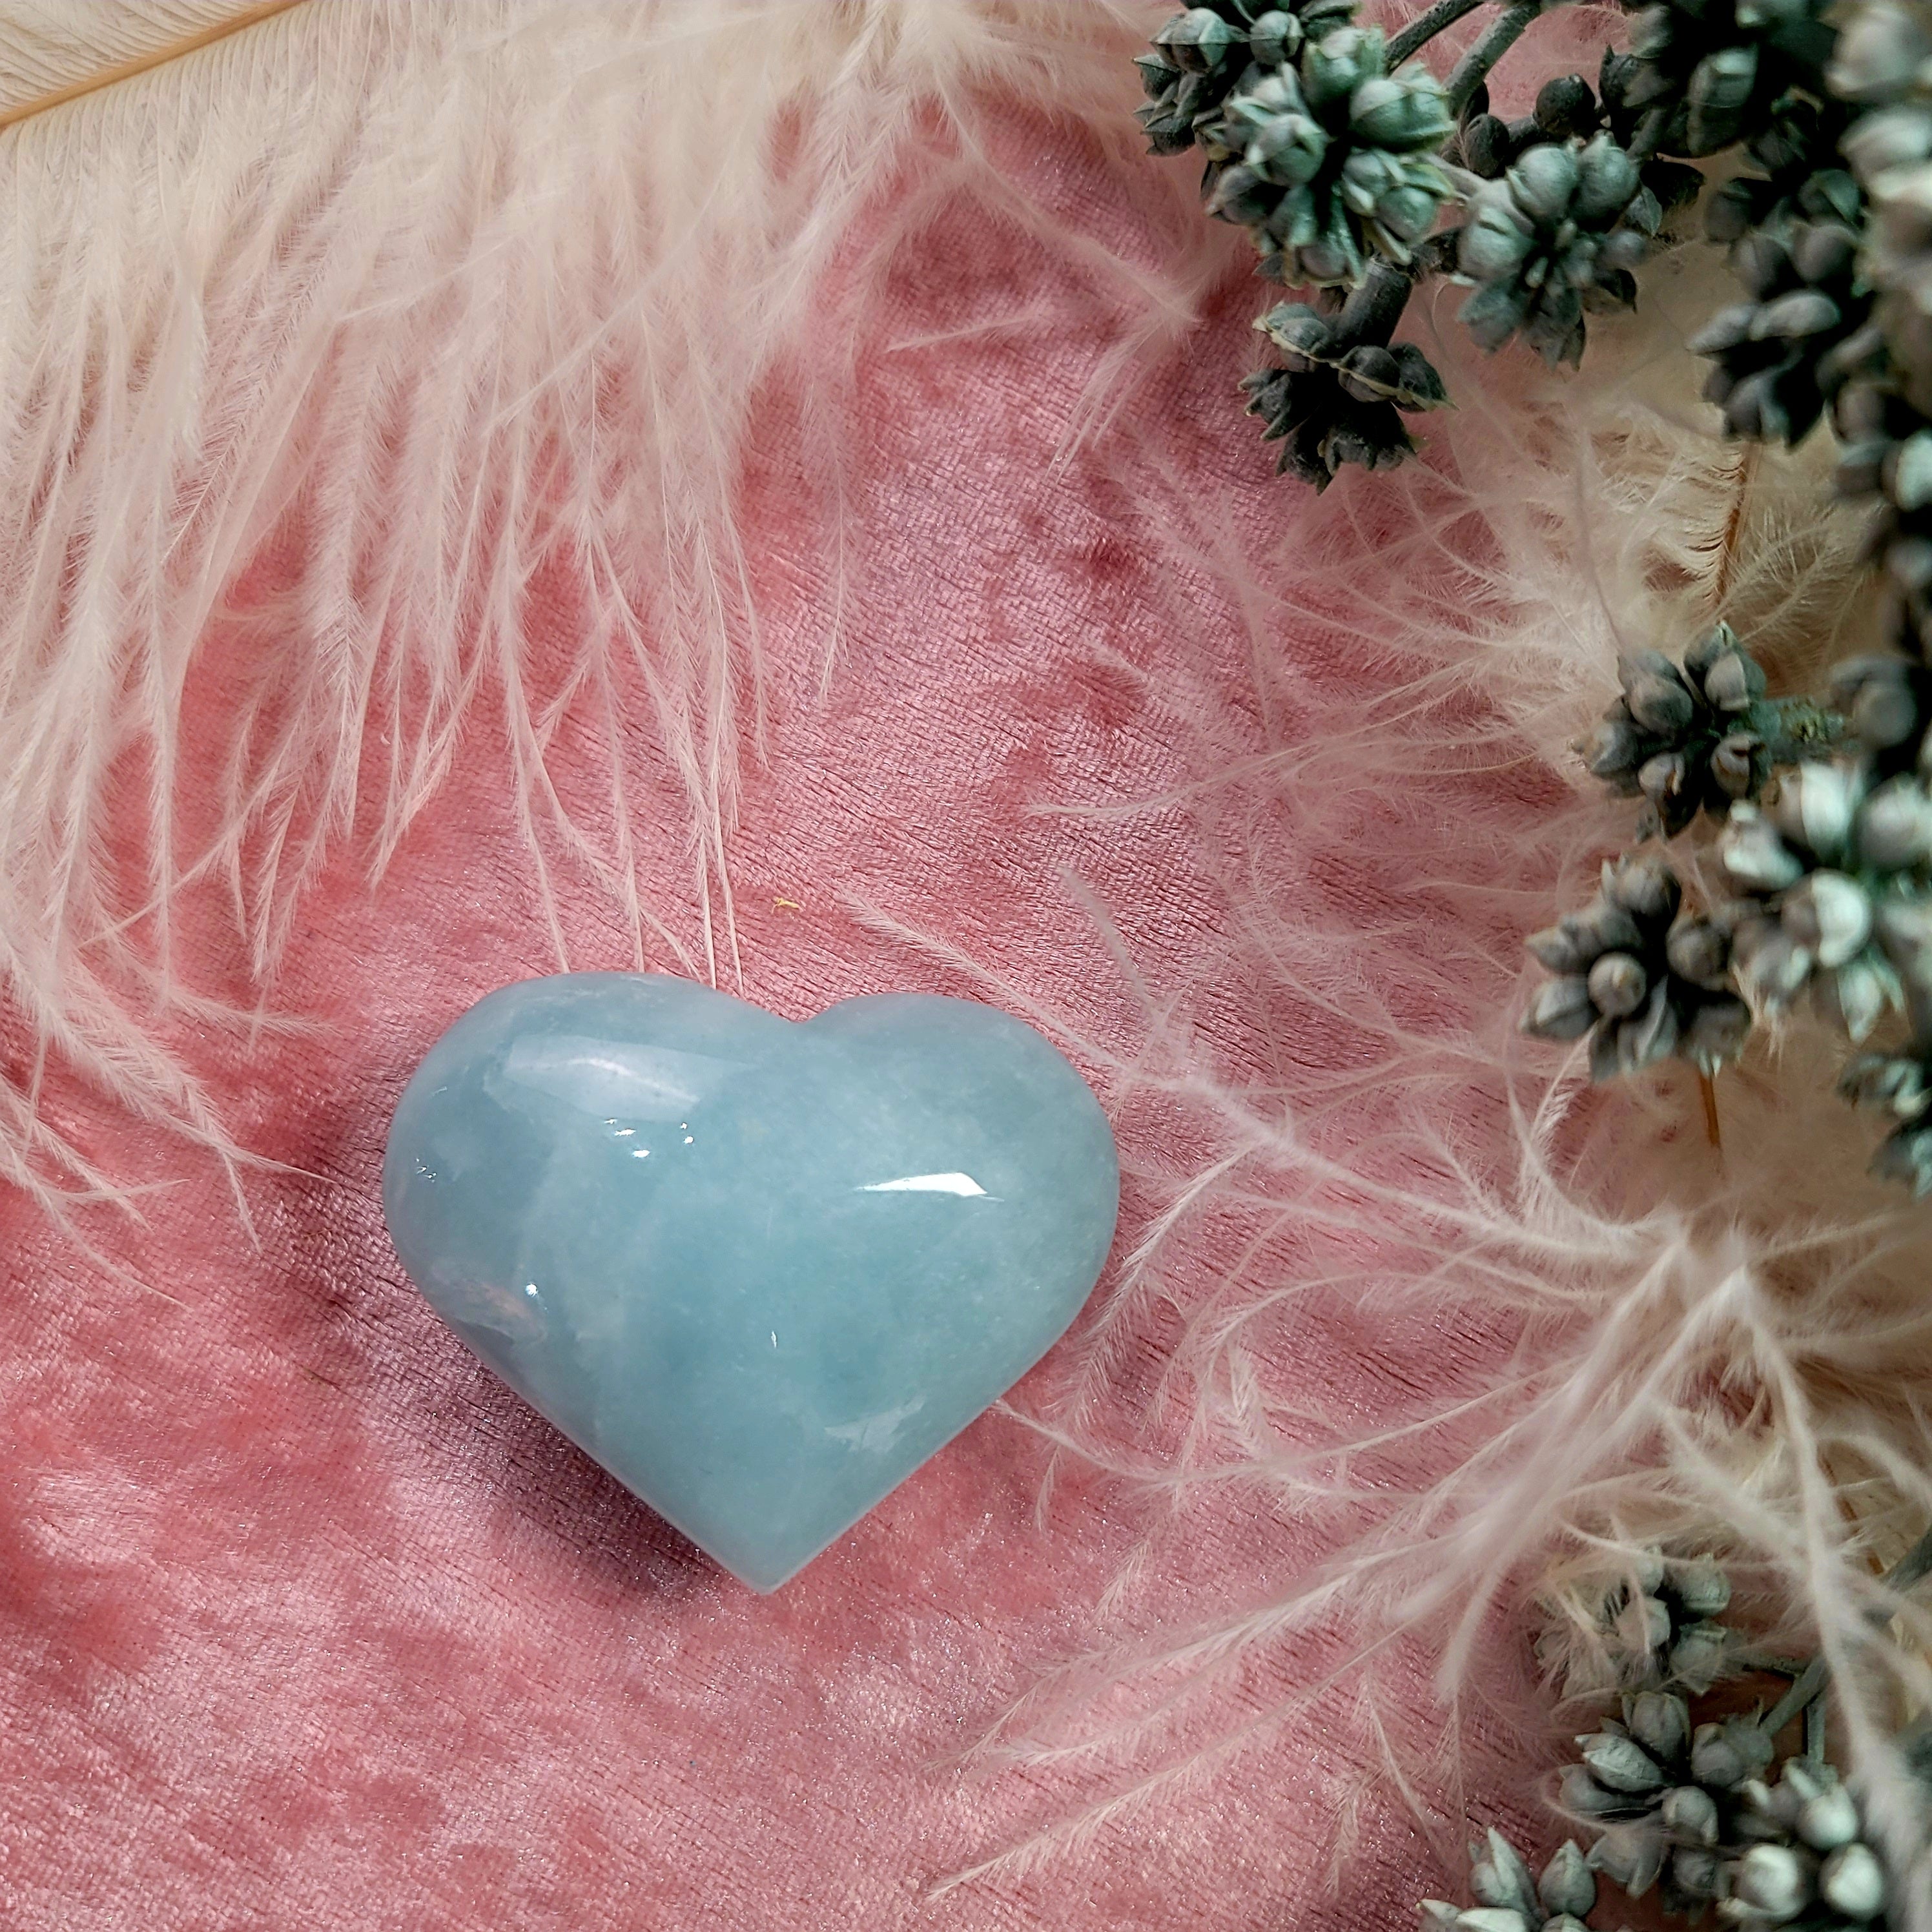 Aquamarine Heart Caving for Calm Communication and Tranquility